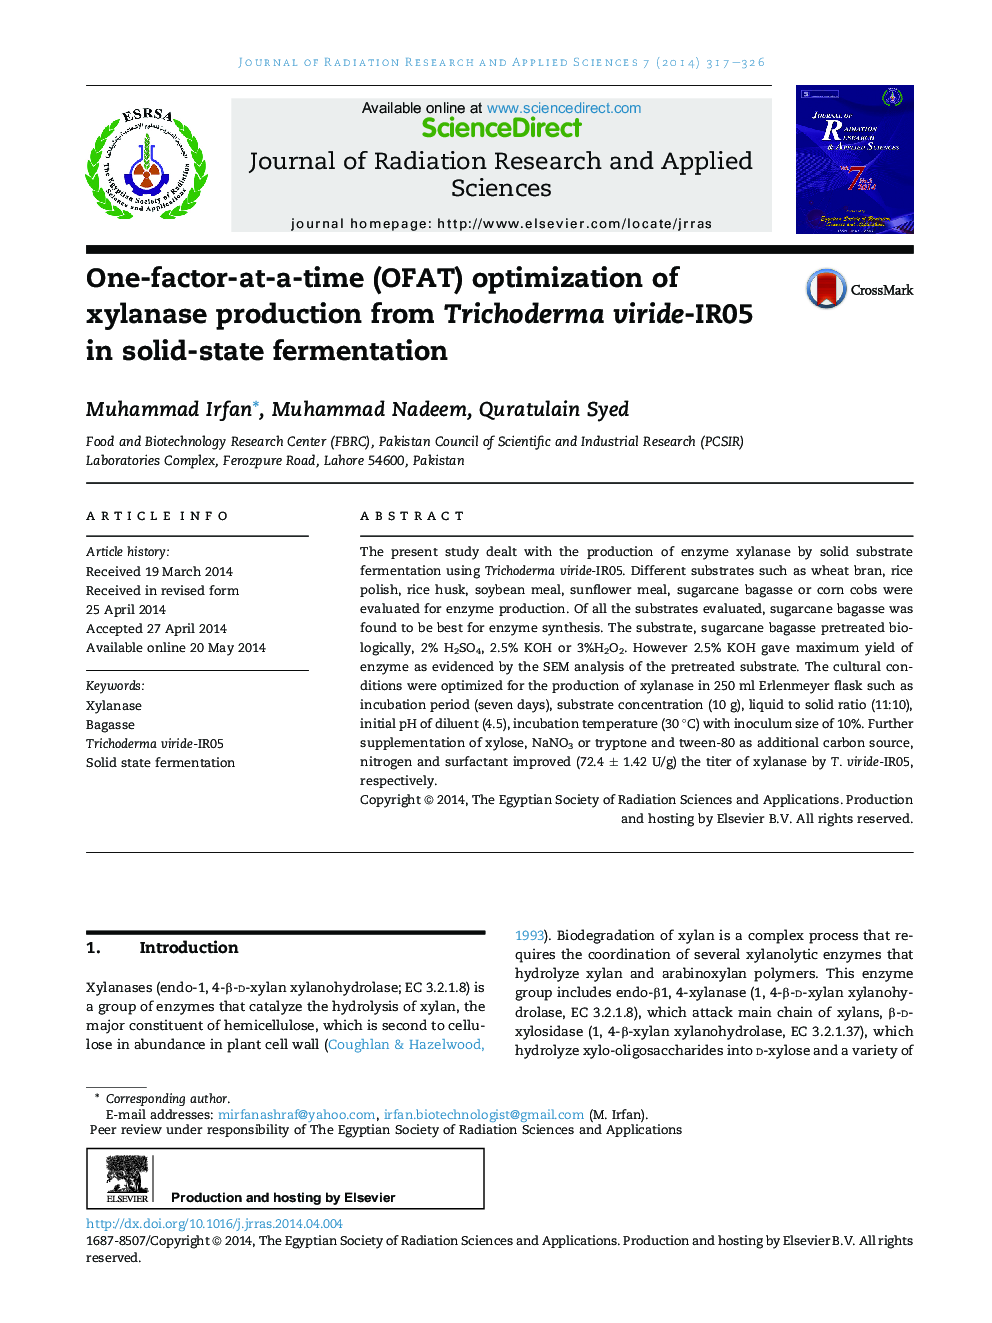 One-factor-at-a-time (OFAT) optimization of xylanase production from Trichoderma viride-IR05 in solid-state fermentation